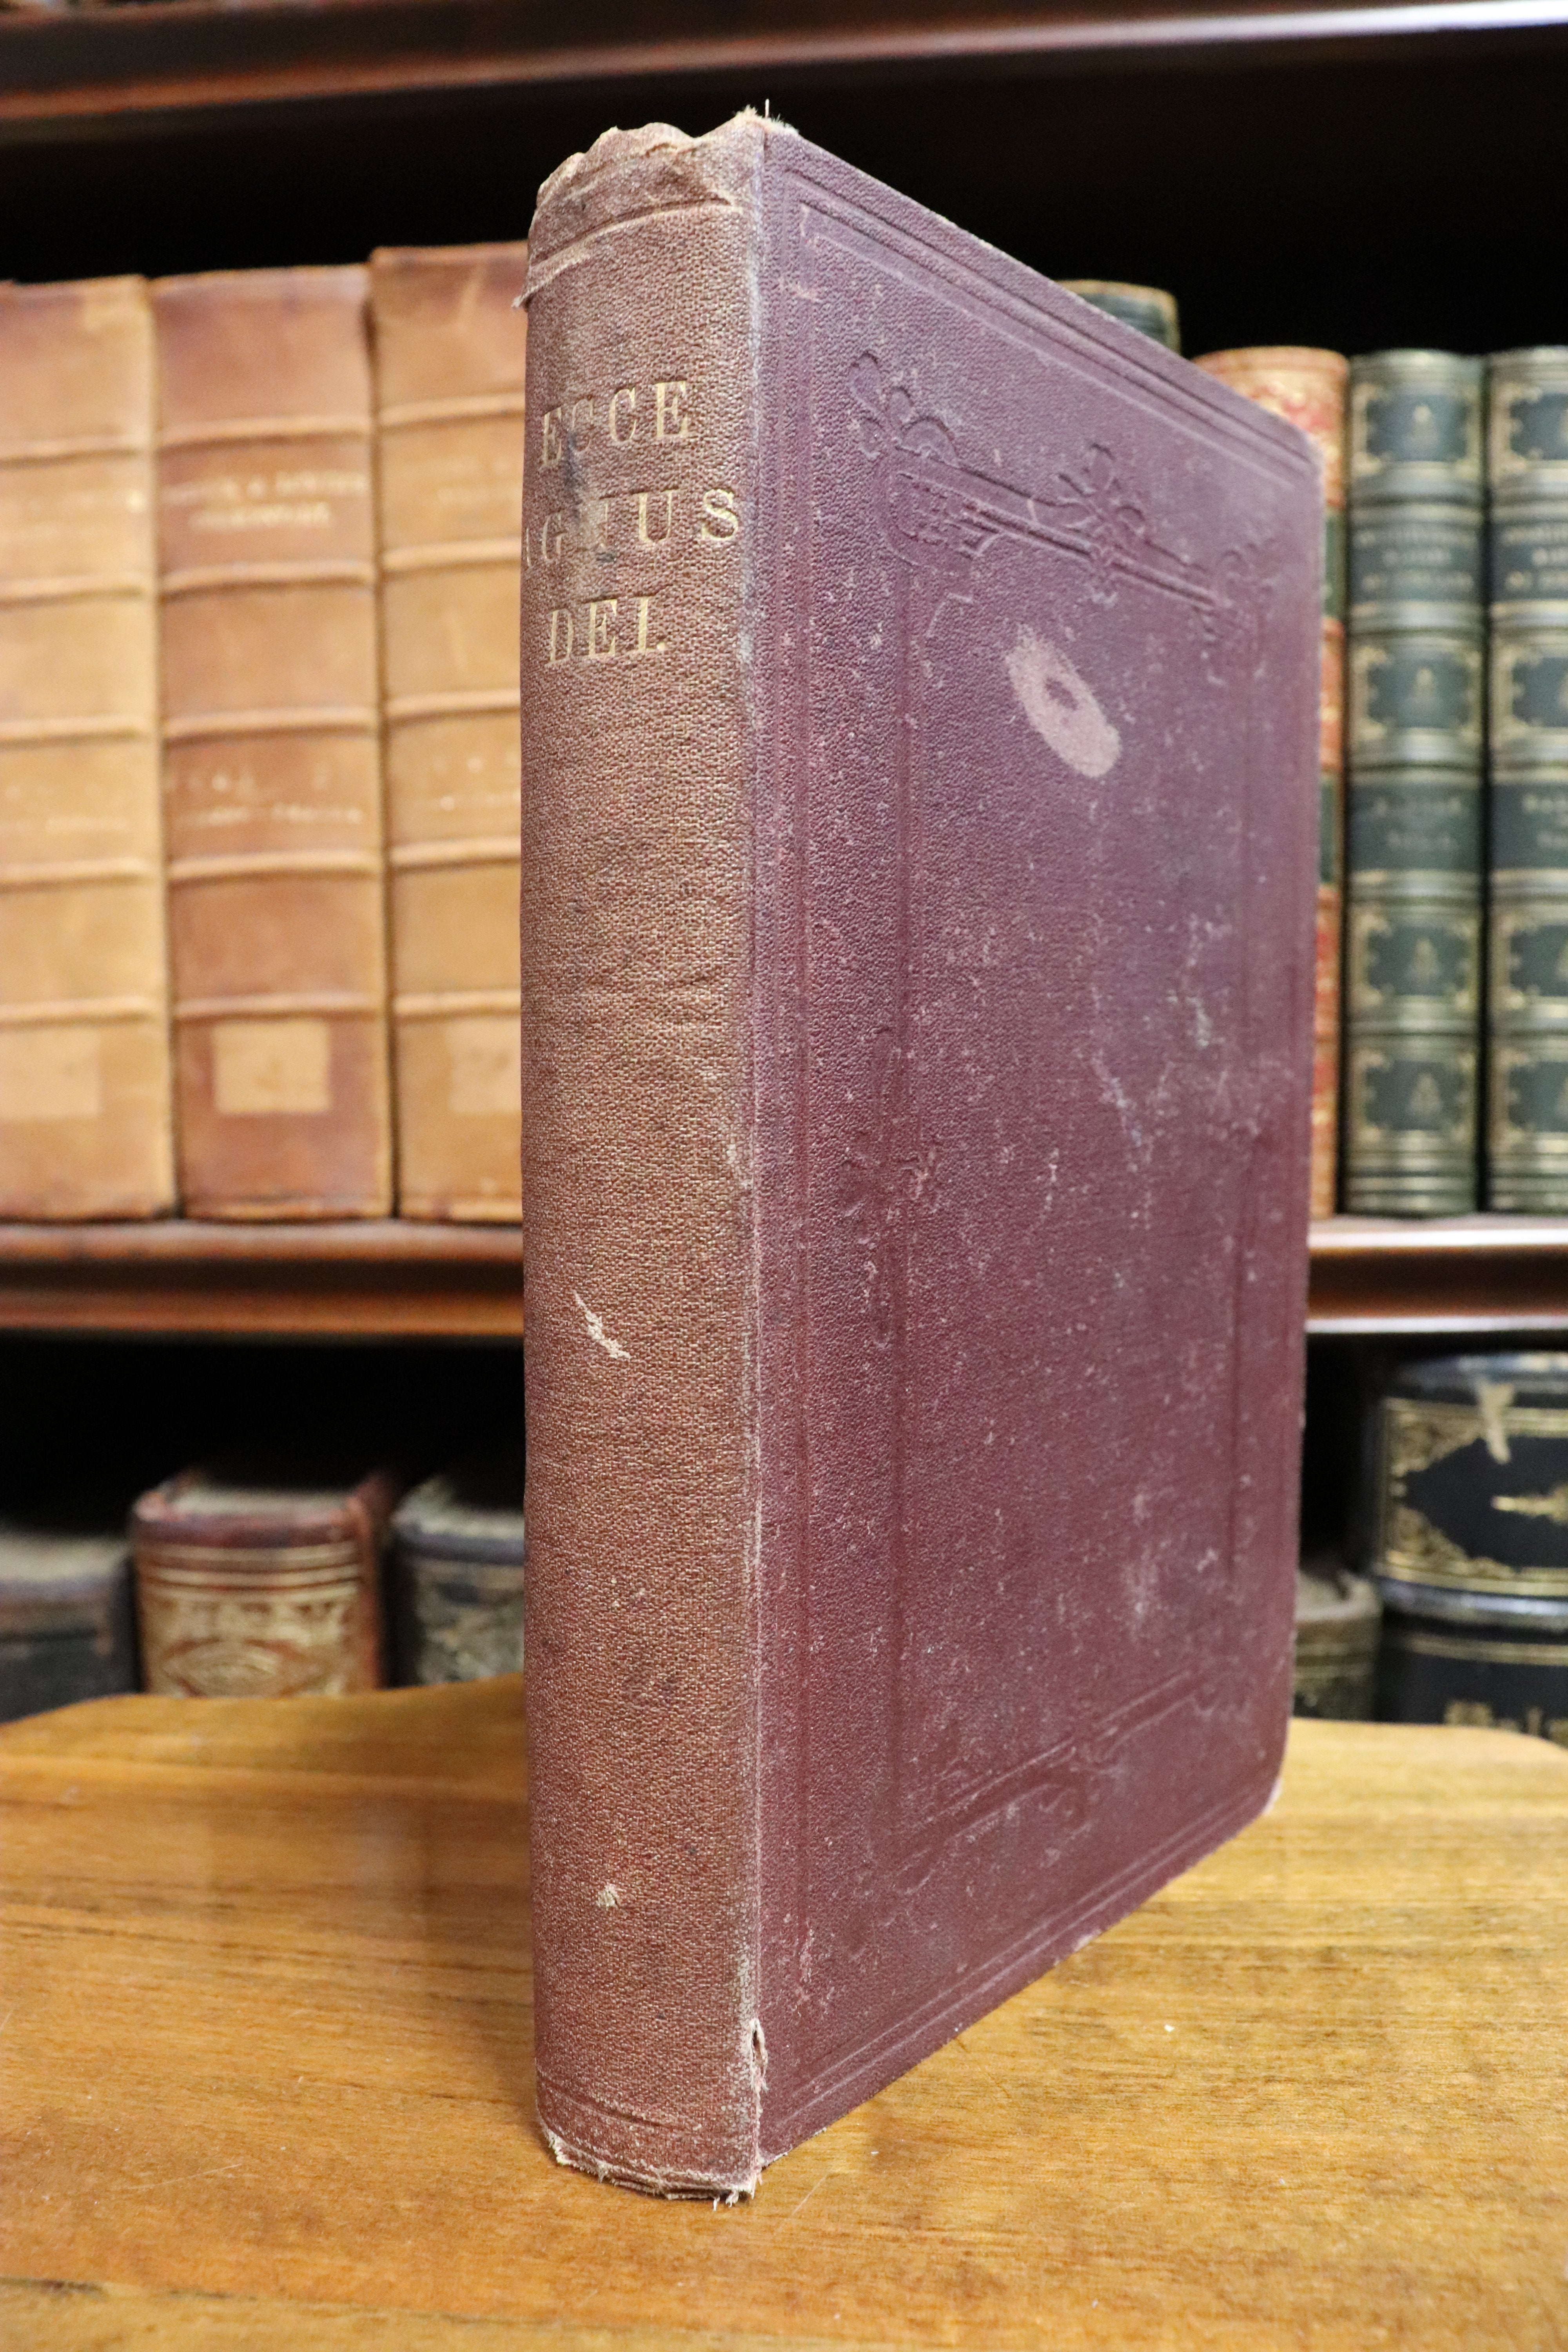 Ecce Agnus Dei: Christianity Without Mystery - 1868 - Antique Religious Book